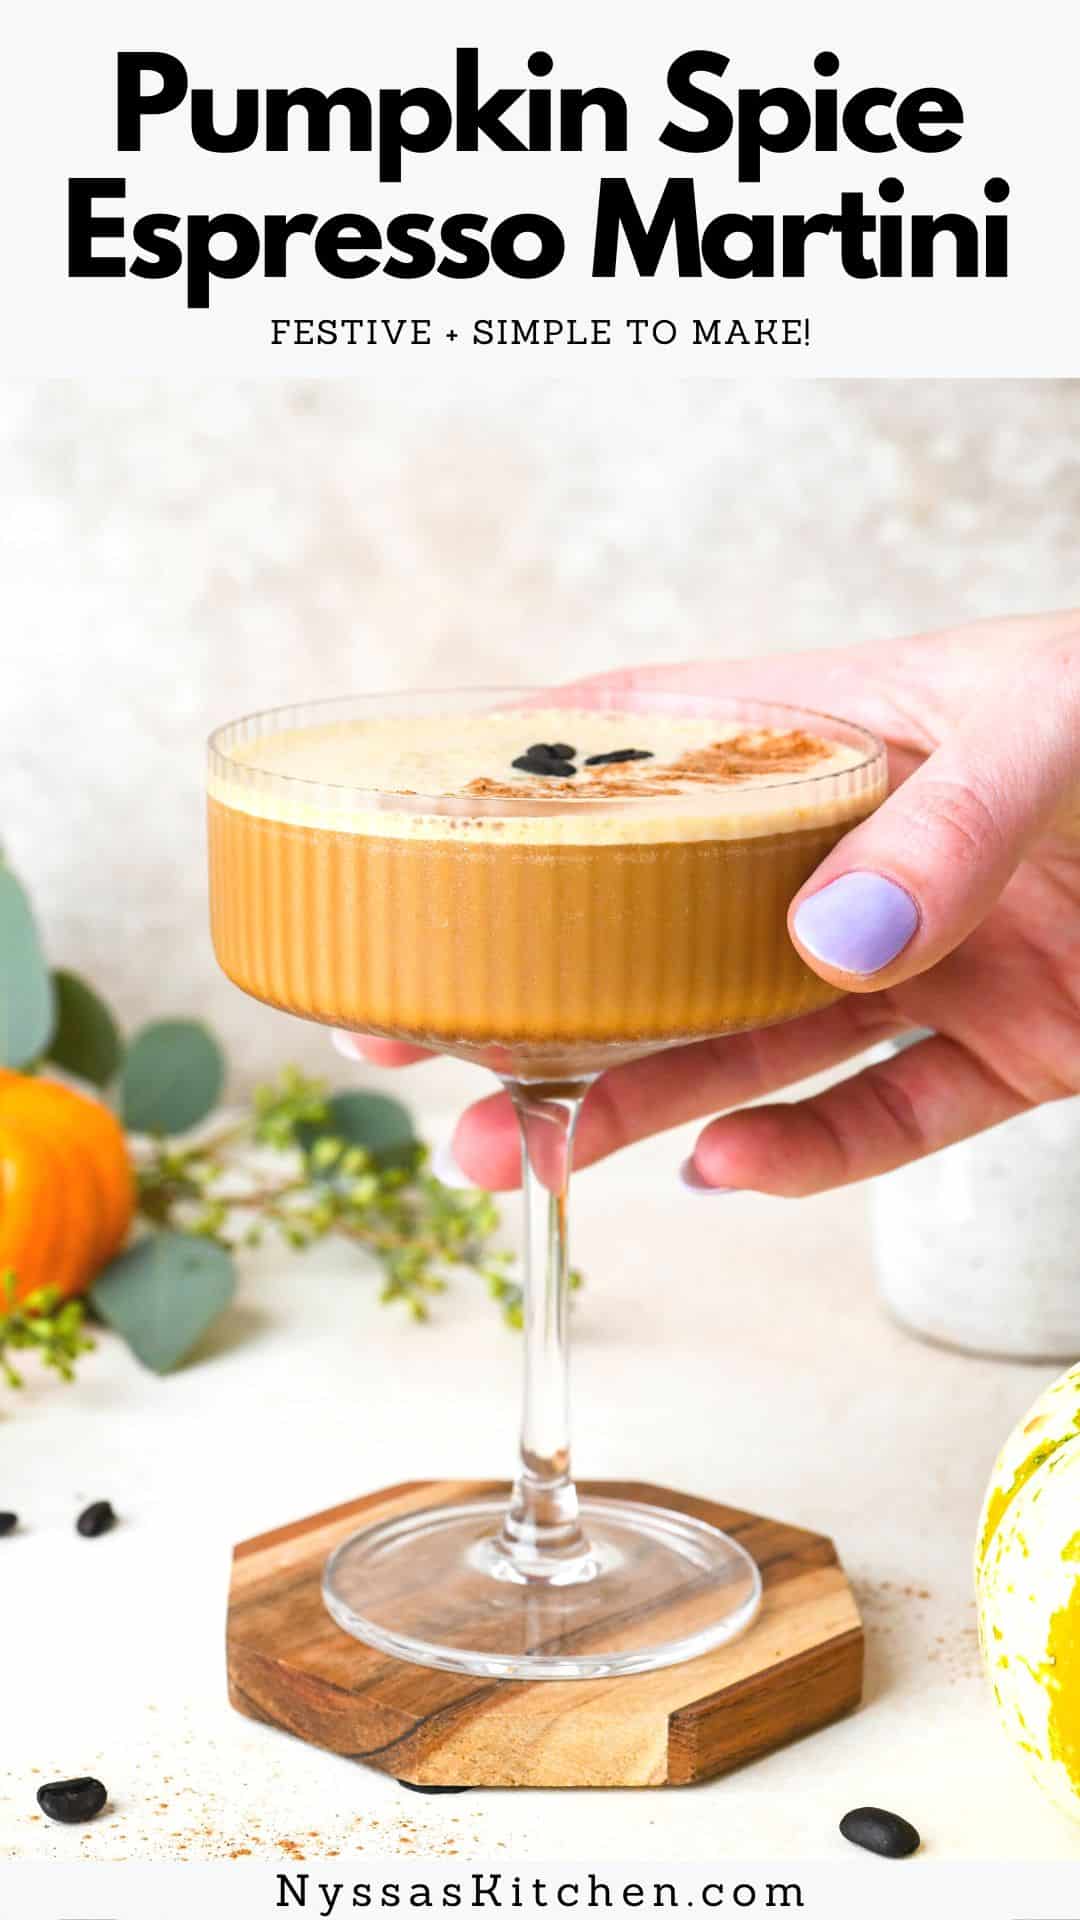 This pumpkin spice espresso martini recipe is a delightful fall inspired twist on a classic cocktail that we all know and love. Made with vodka, coffee liqueur, cold brew or espresso, REAL pumpkin, and pumpkin pie spice. The perfect creamy pumpkin spice cocktail to enjoy all fall long! Easily made dairy free by opting for a dairy free creamer.